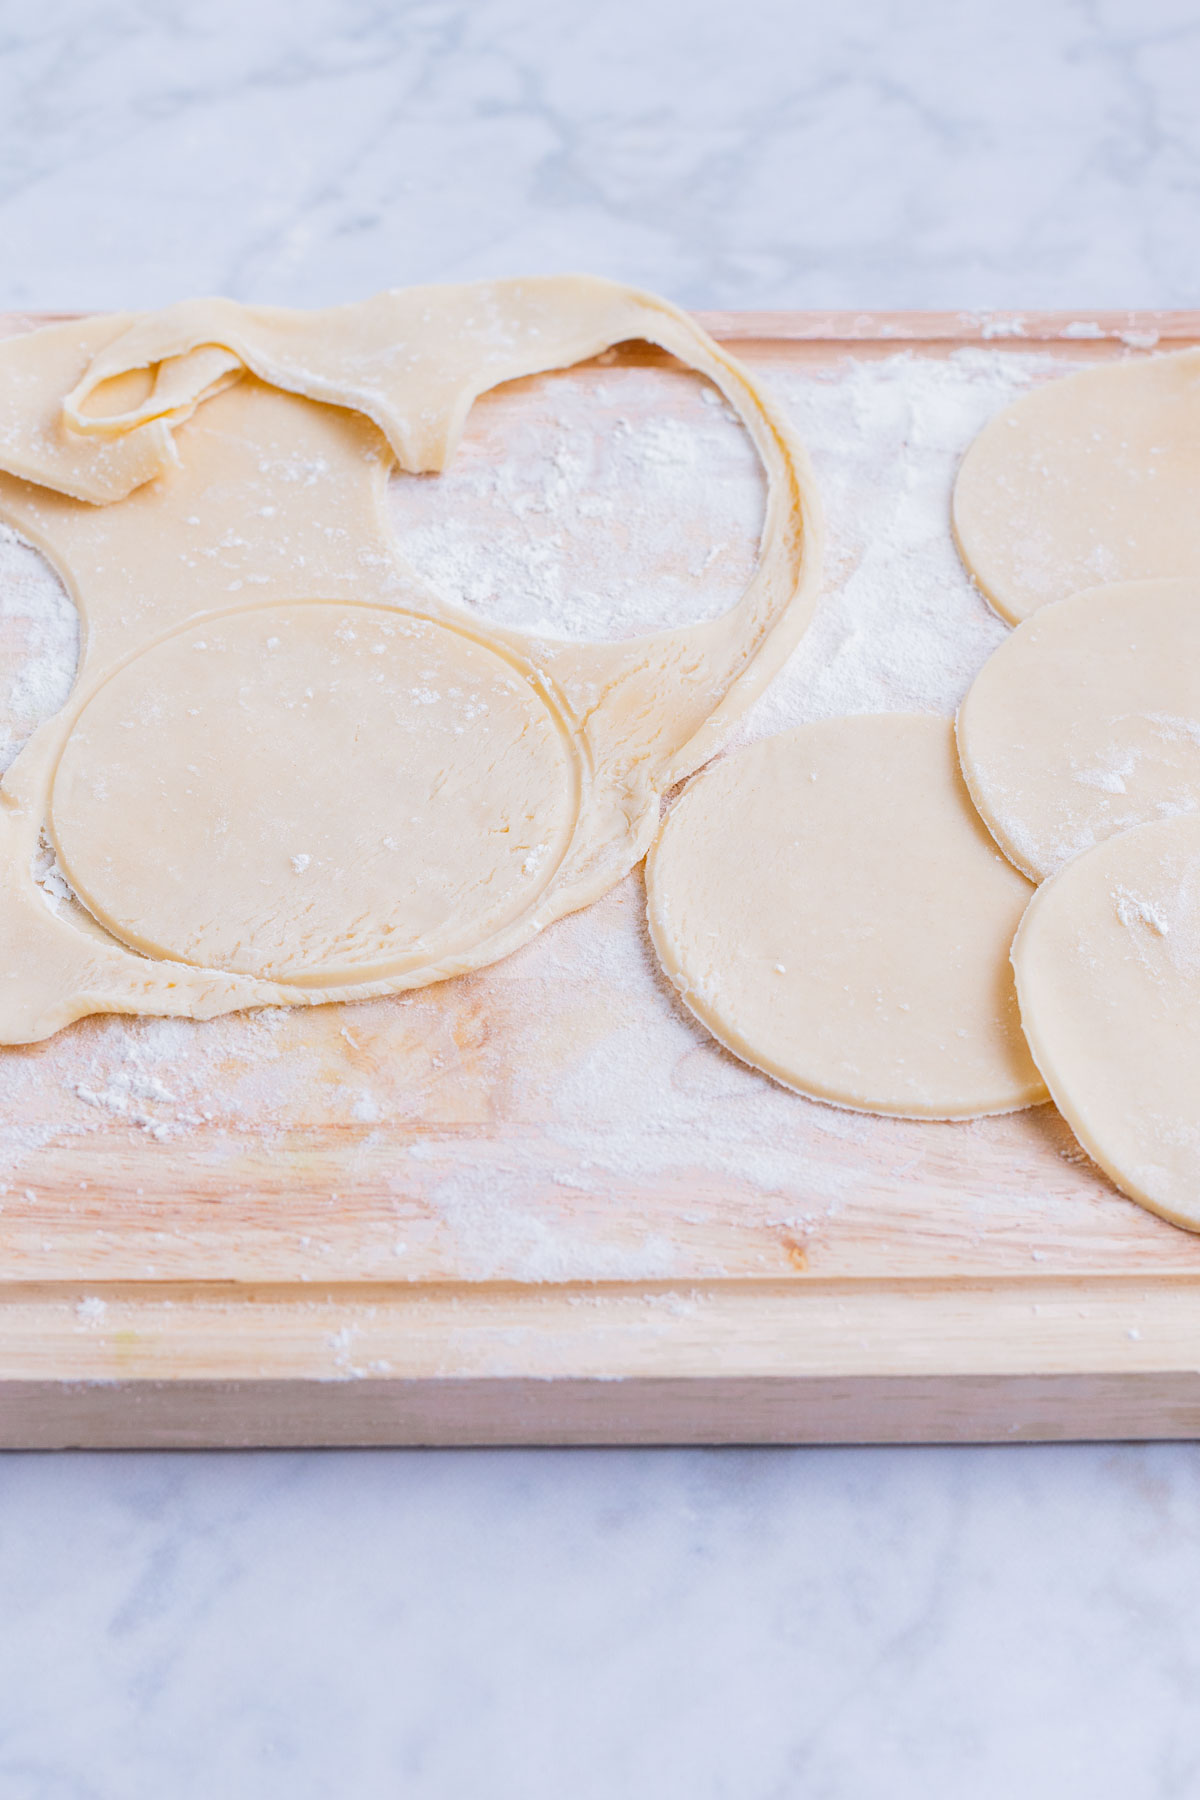 Circles are cut from the rolled out pie crust.